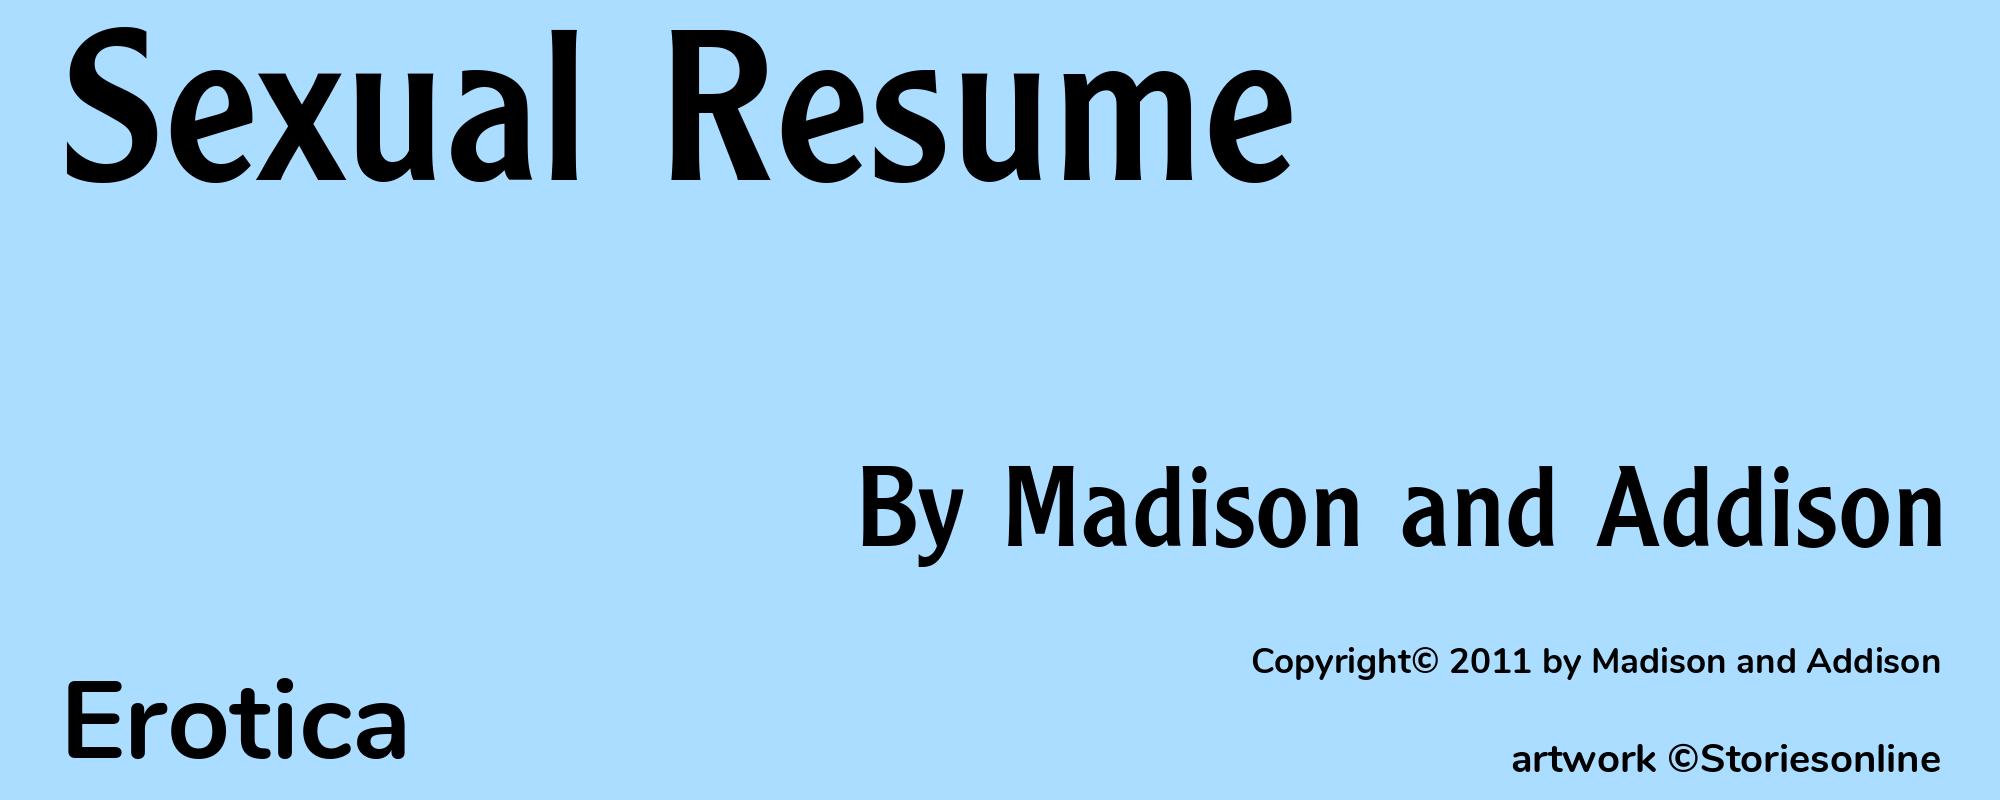 Sexual Resume - Cover